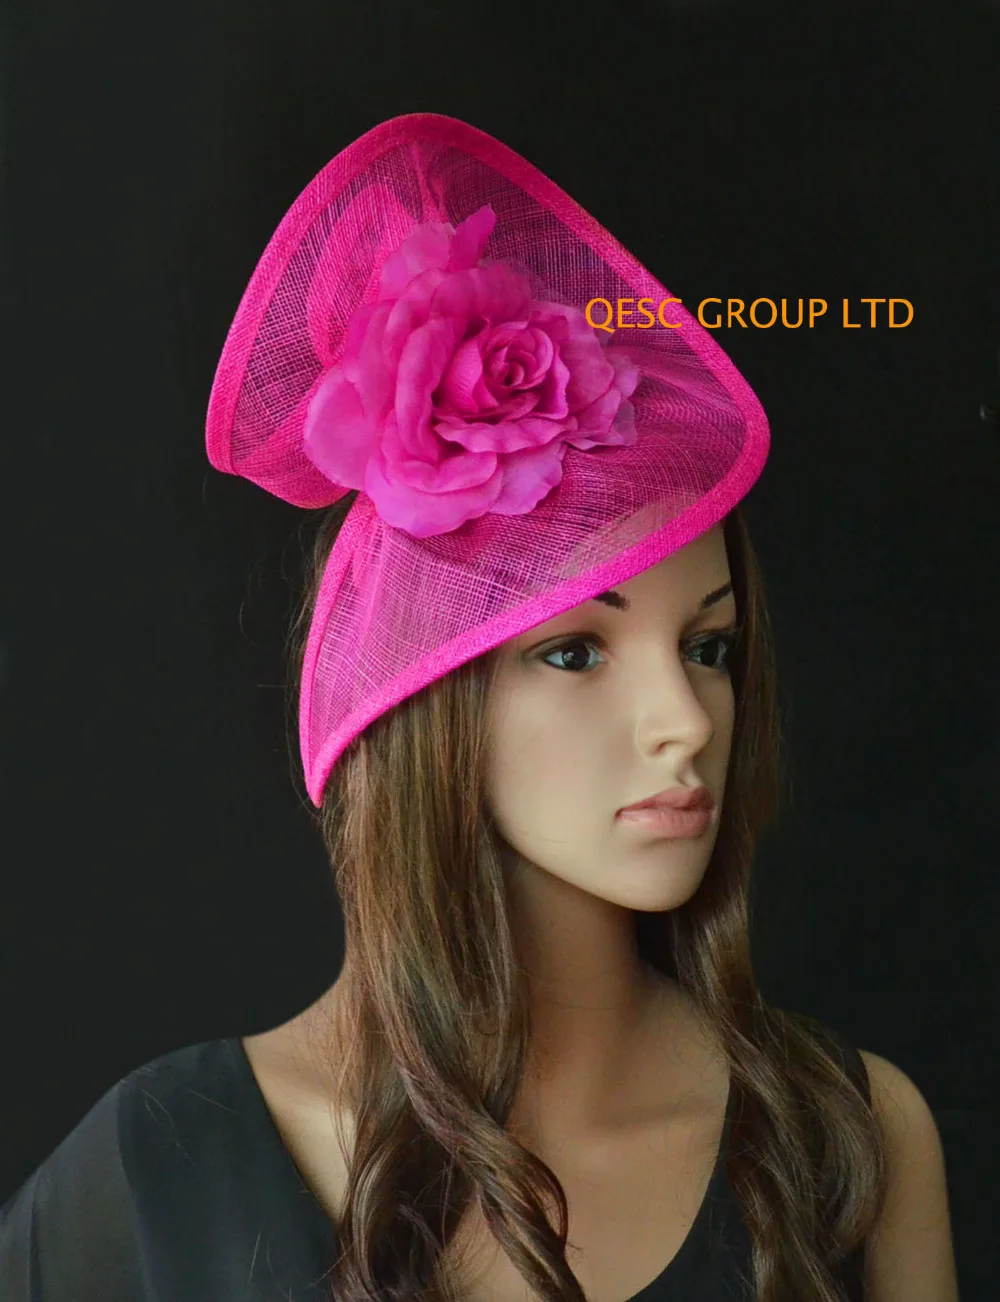 

Fuchsia hot pink Sinamay fascinator hat in SPECIAL shape with silk flower for Melbourne Cup,Ascot Races,Wedding,Kentucky Derby.